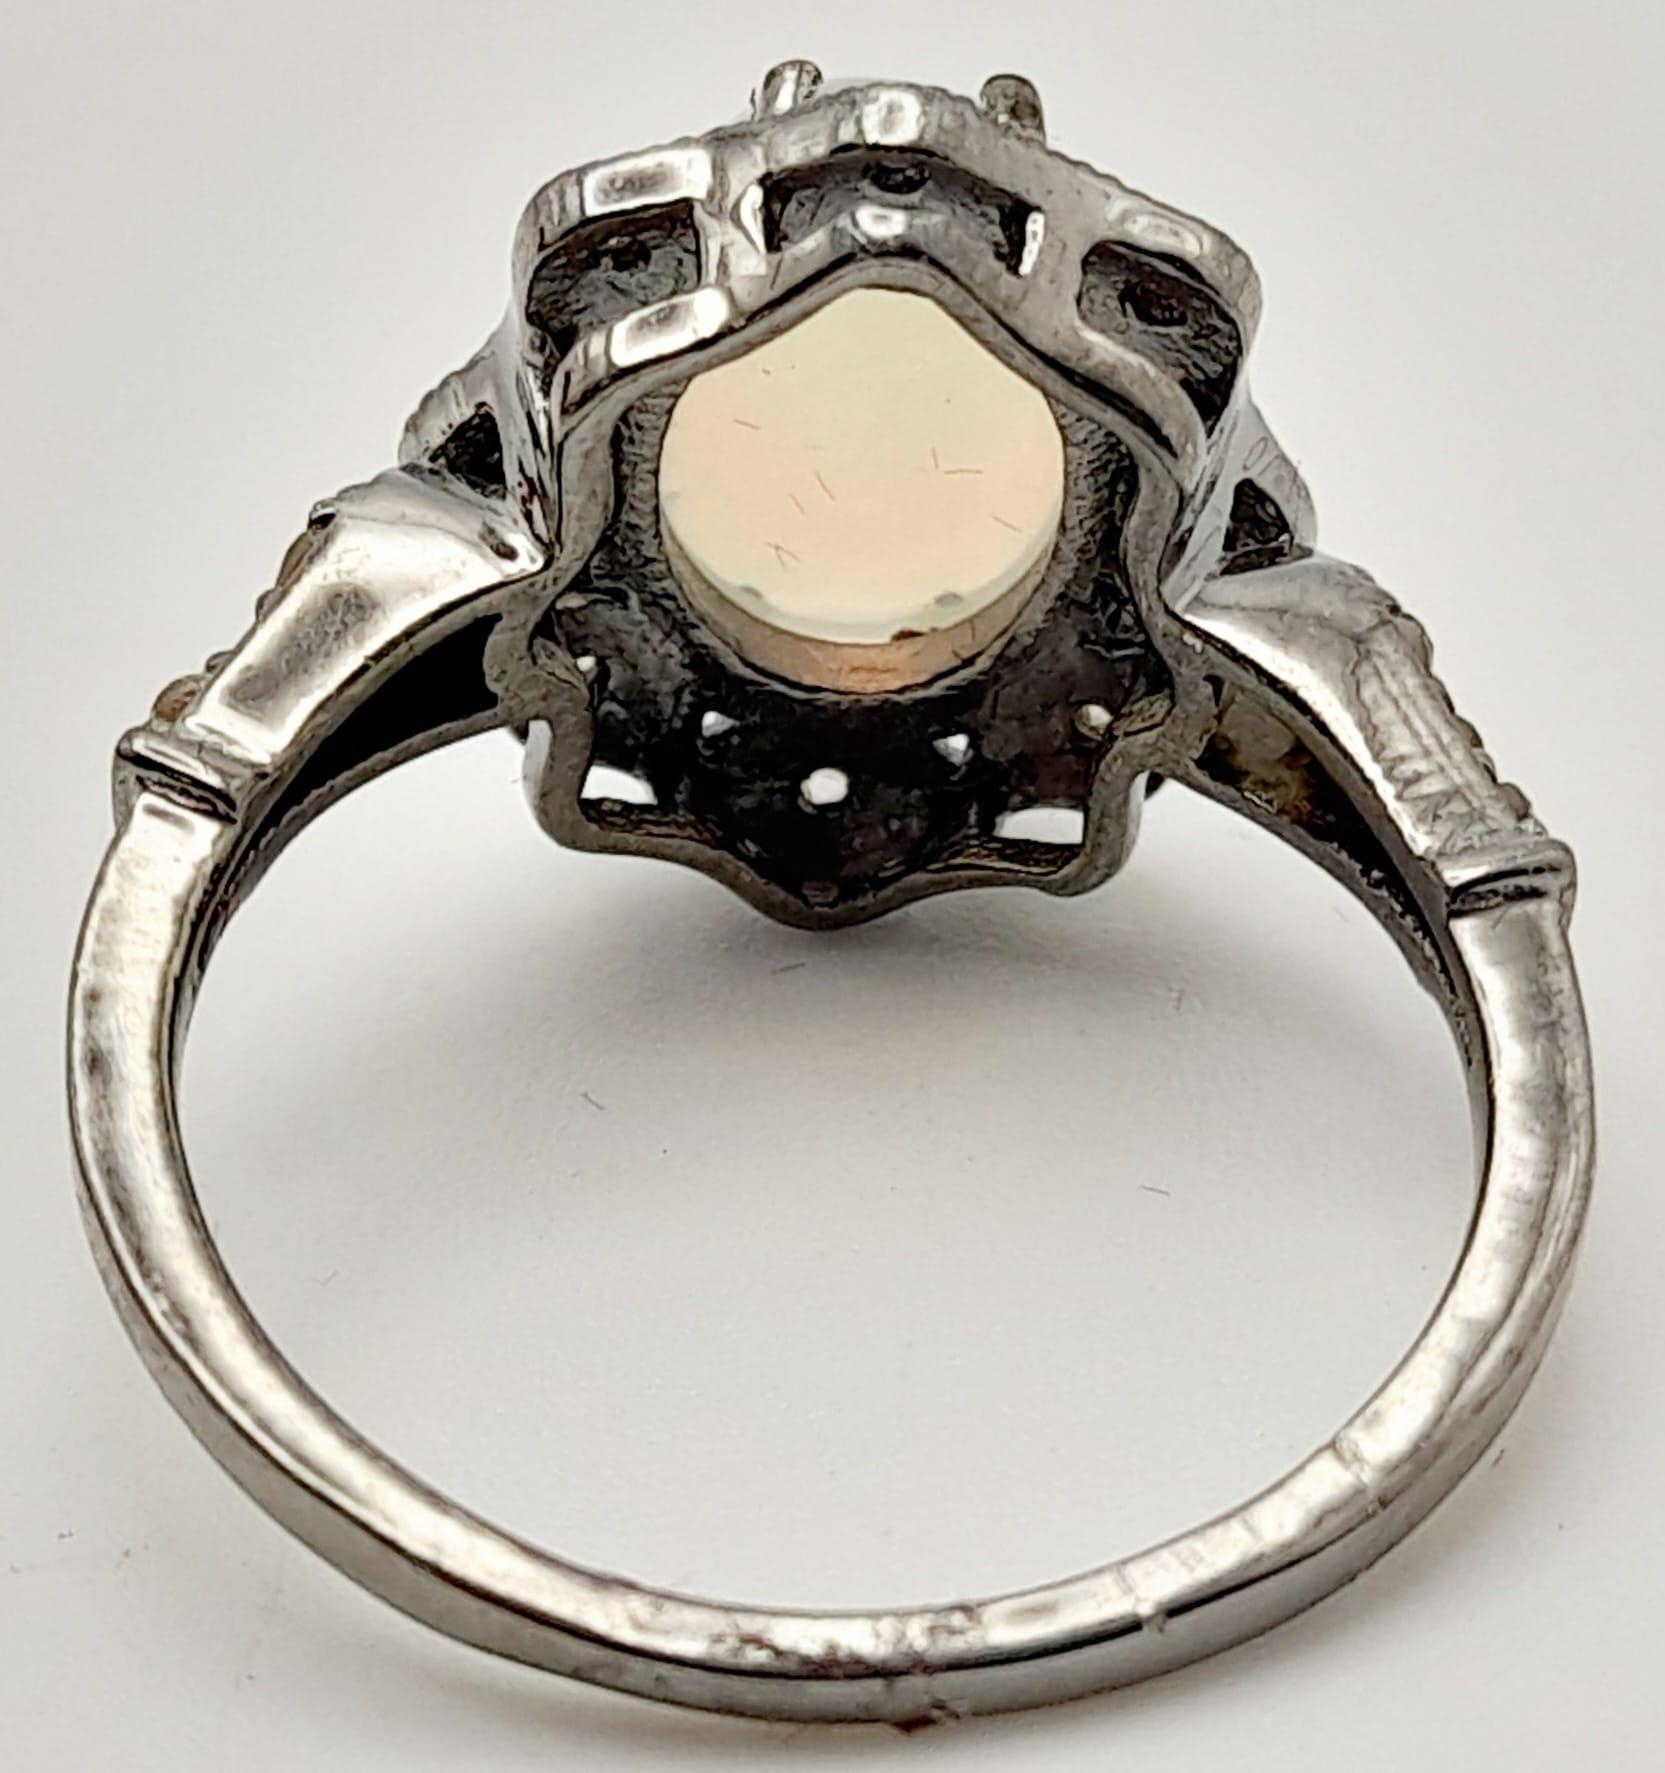 An Ethiopian Opal Ring with Rose Cut diamond Surround and Accents. Set in 925 Sterling silver. - Image 3 of 5